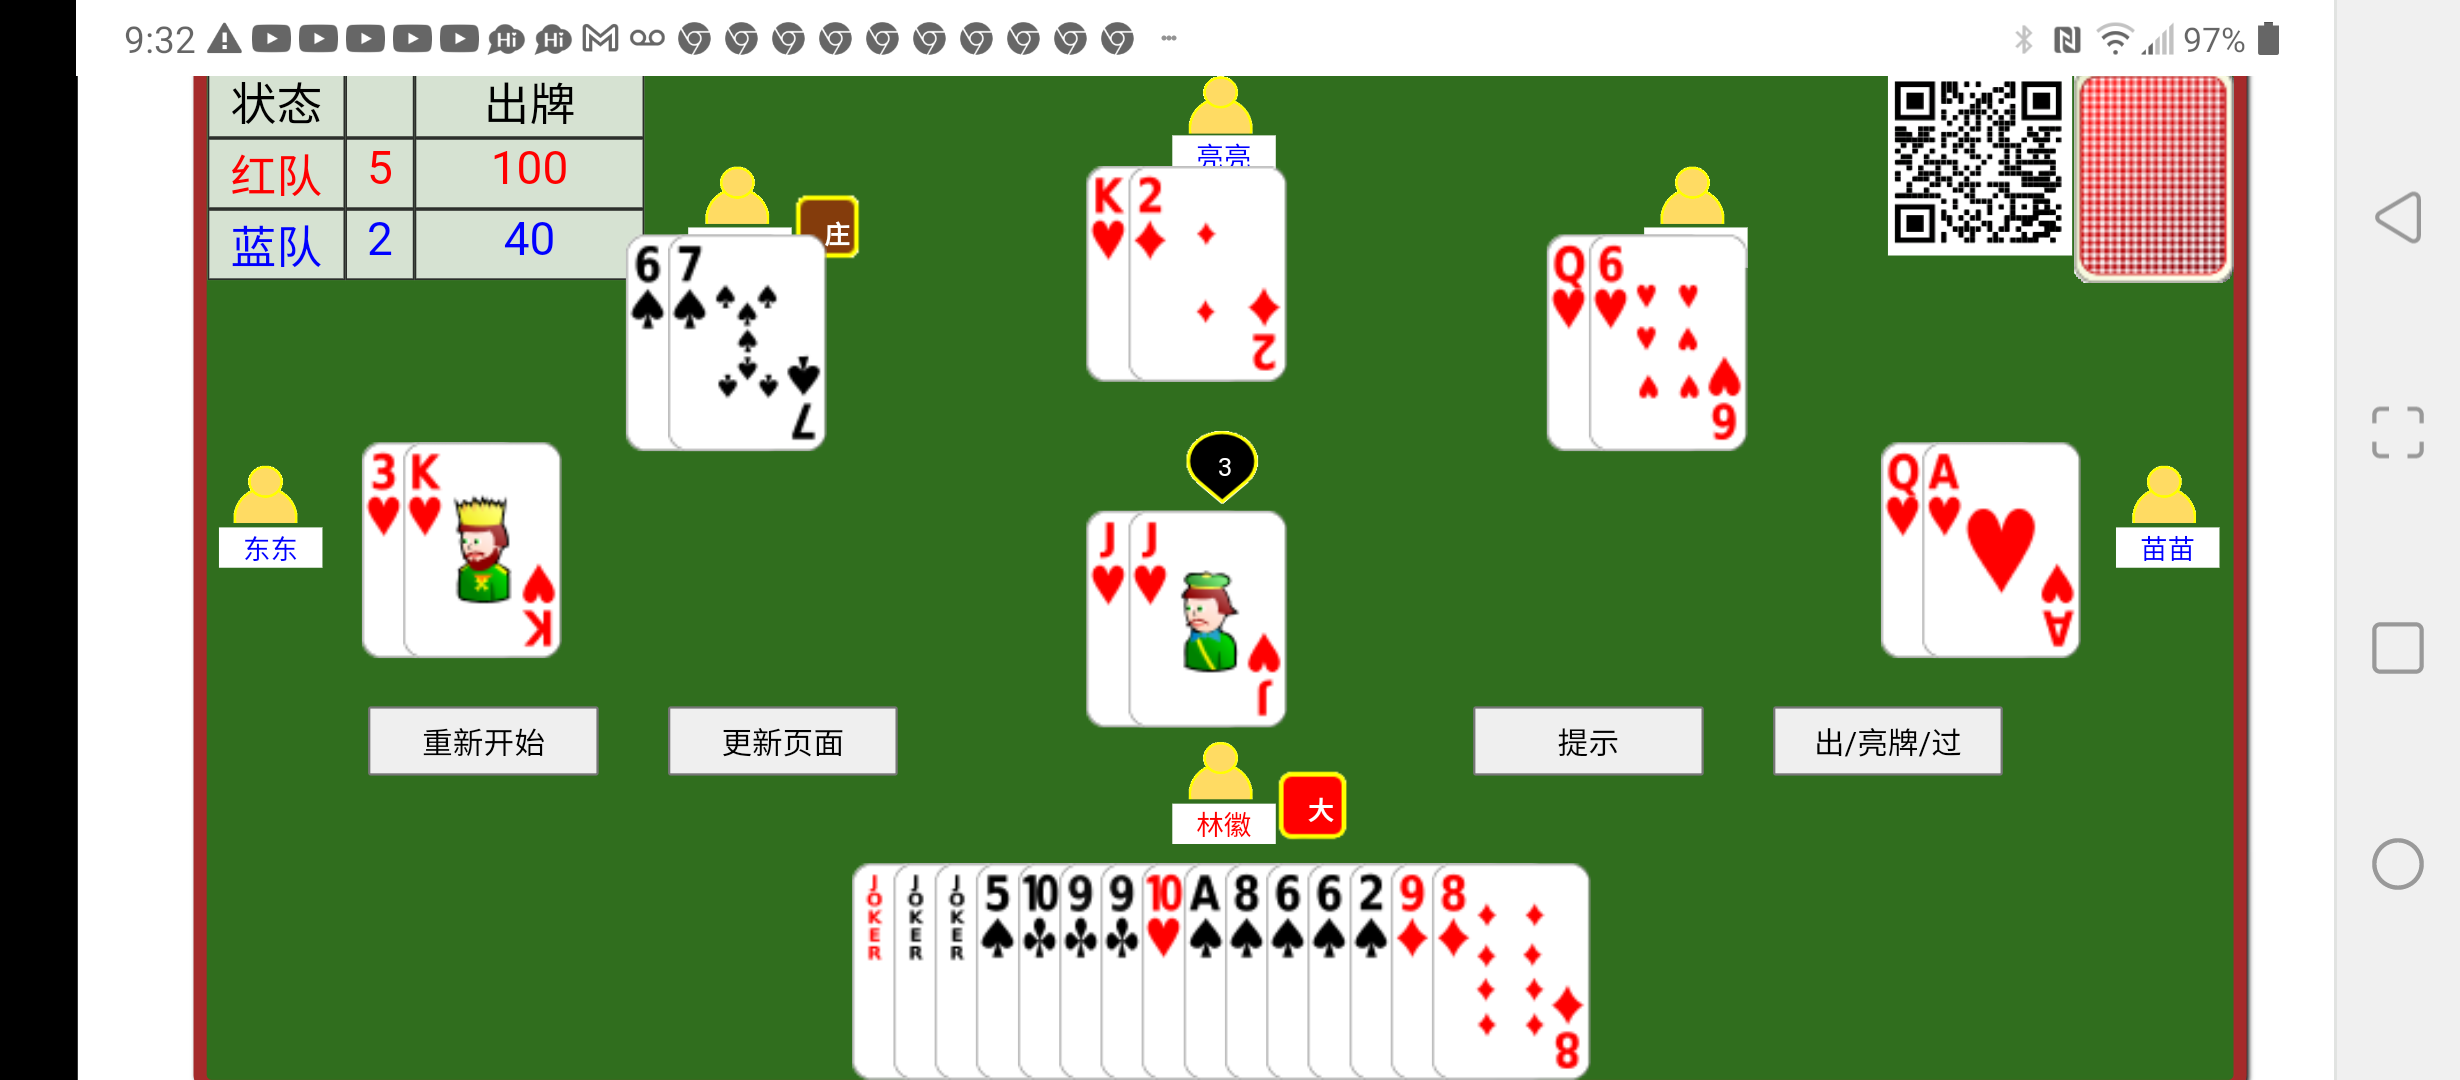 html5 tractor card game Screenshot_20220116-0932311.png